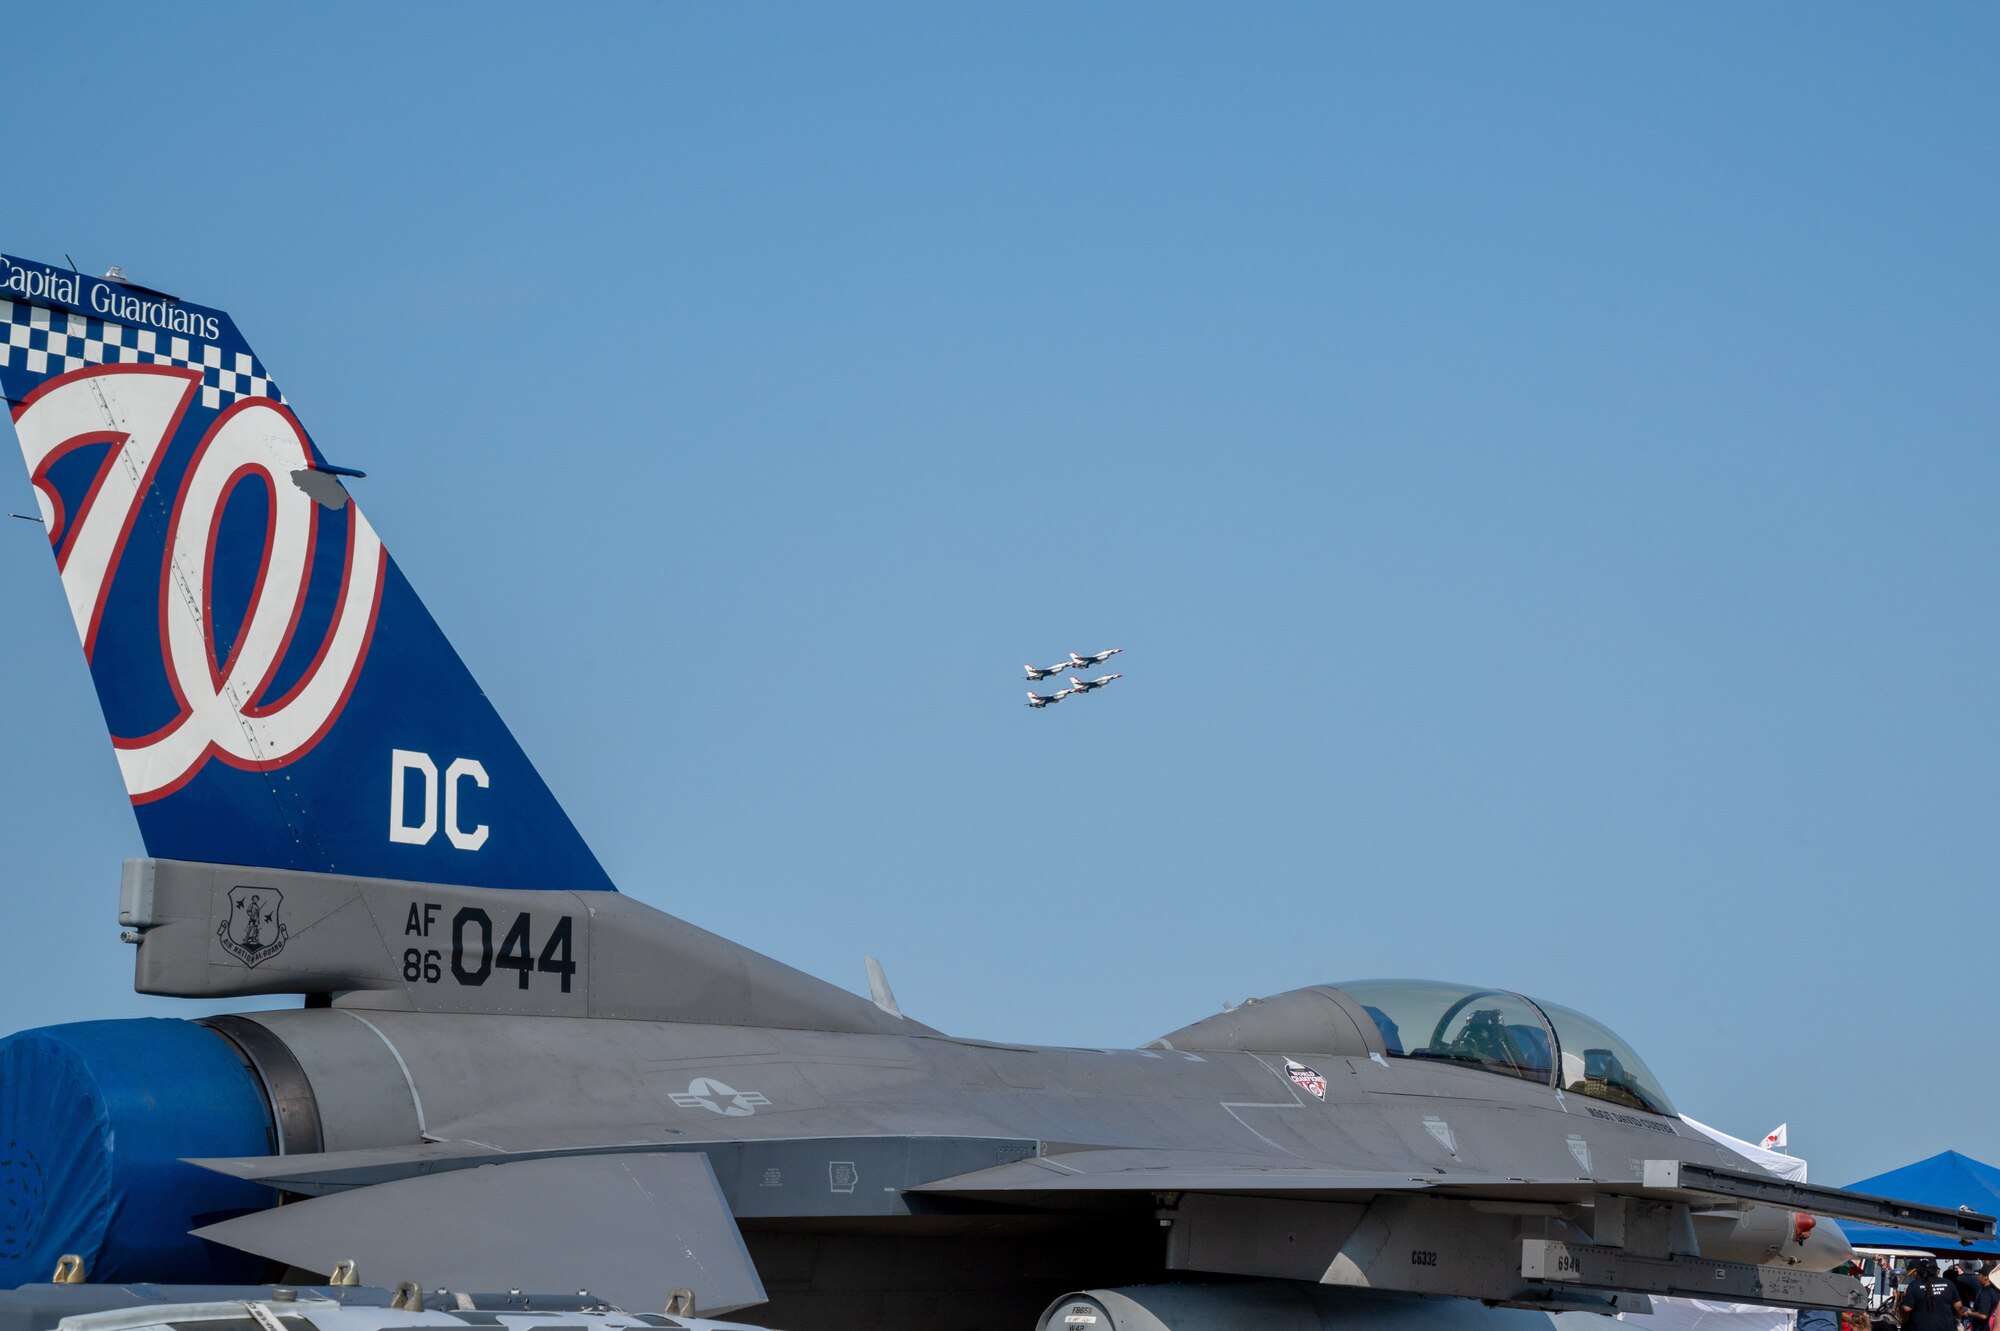 This year’s expo theme is "Innovate, Accelerate, Thrive...the Air Force at 75." The program of events included aerial demonstrations, aircraft static displays, vendors, and meet and greets.